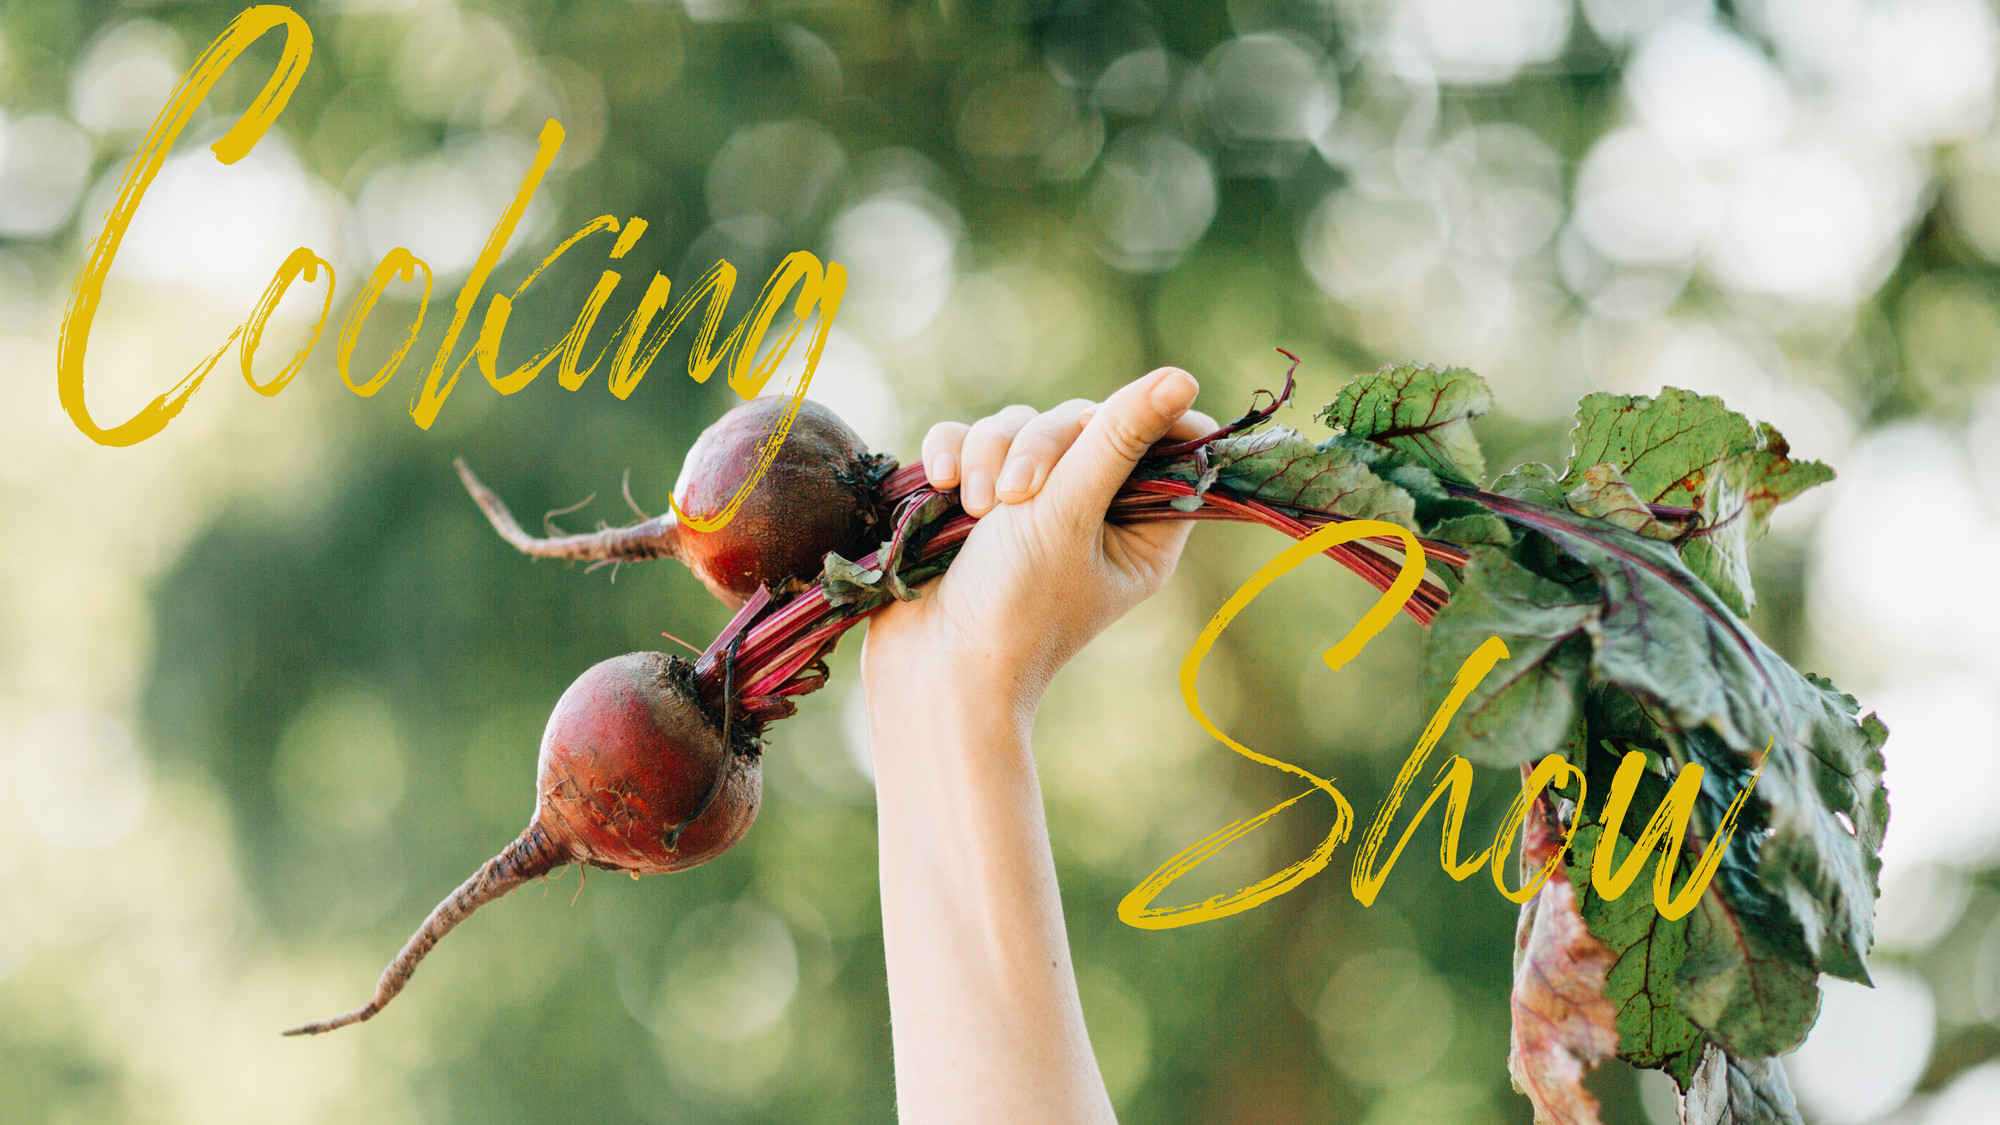 A single arm is shown holding up a pair of beets by their stems. ‘Cooking Show’ is written in cursive.